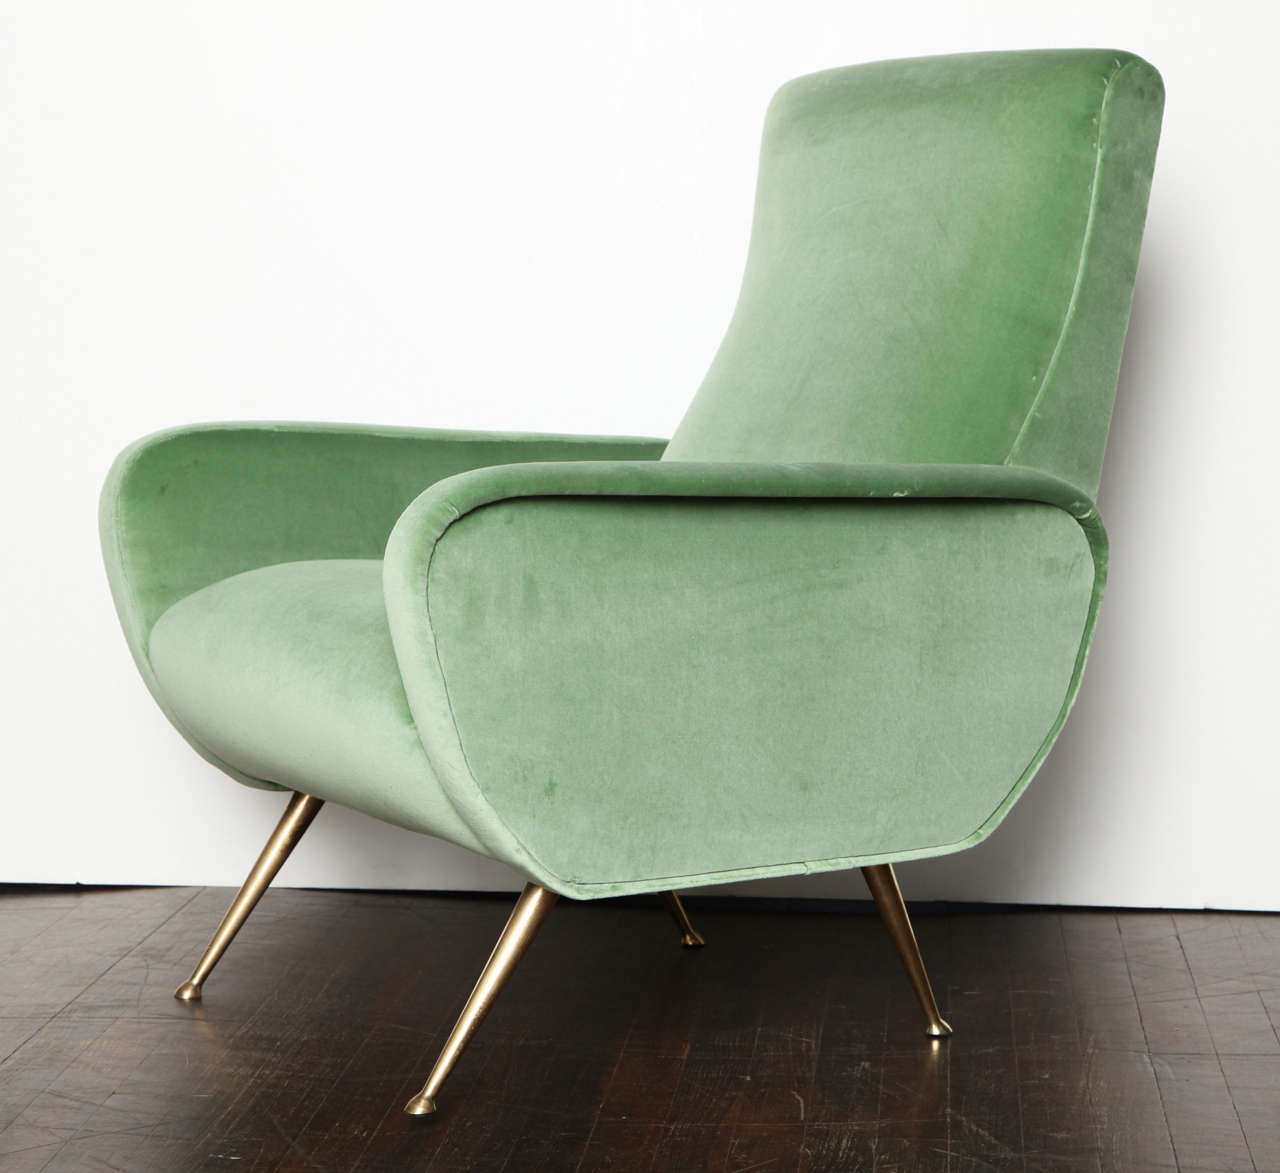 Elegant forms with sculptural armrests and great details. Polished brass legs with attached pod feet, and pale green velvet upholstery.